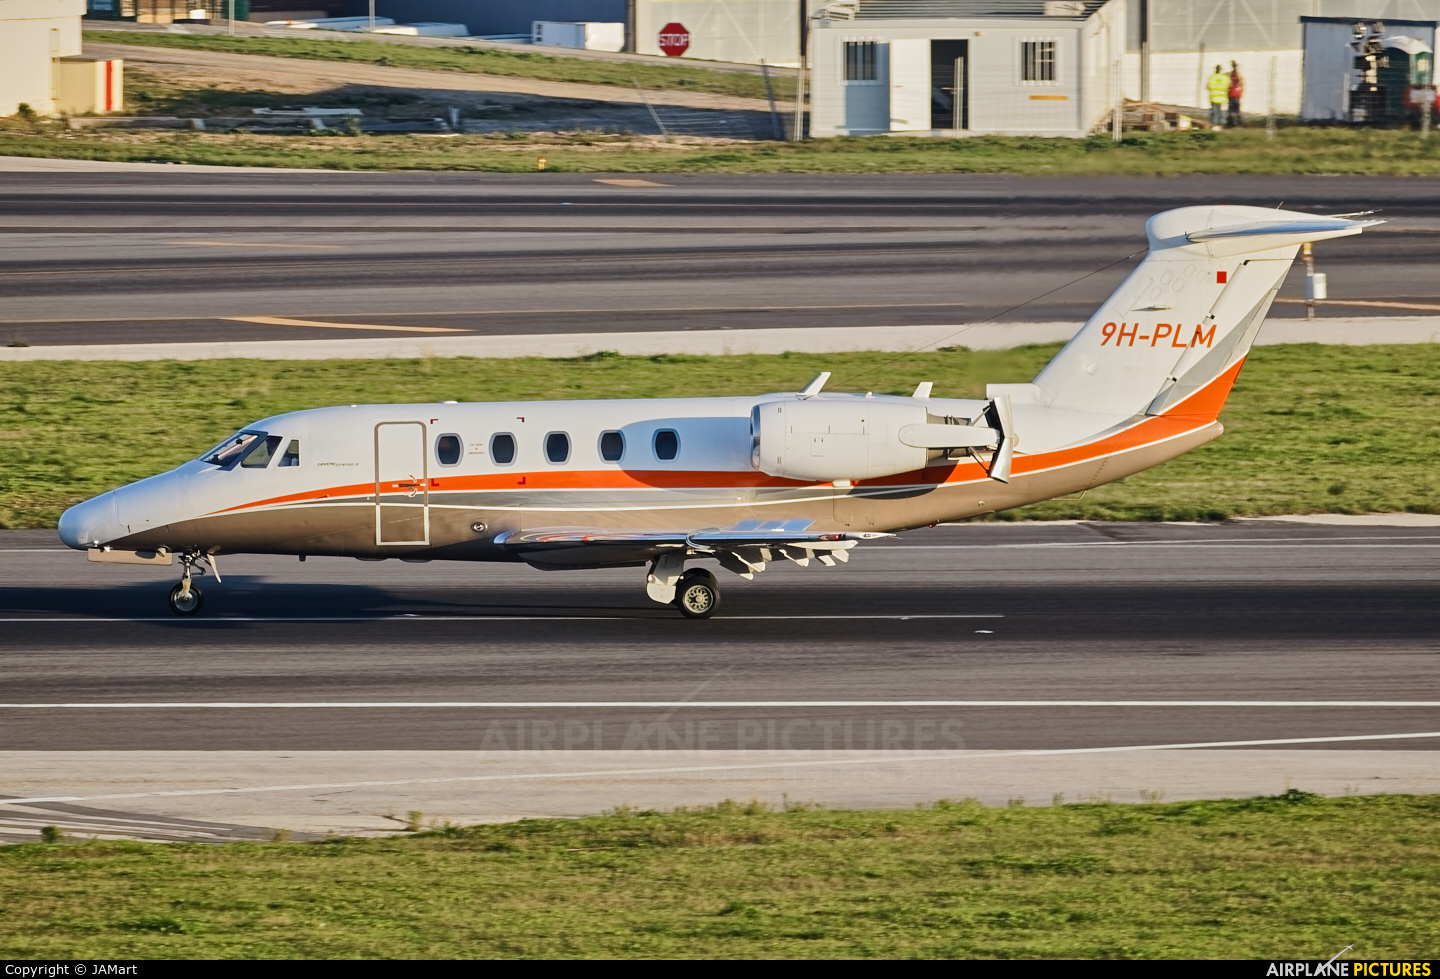 Lux Wing Group 9H-PLM aircraft at Lisbon